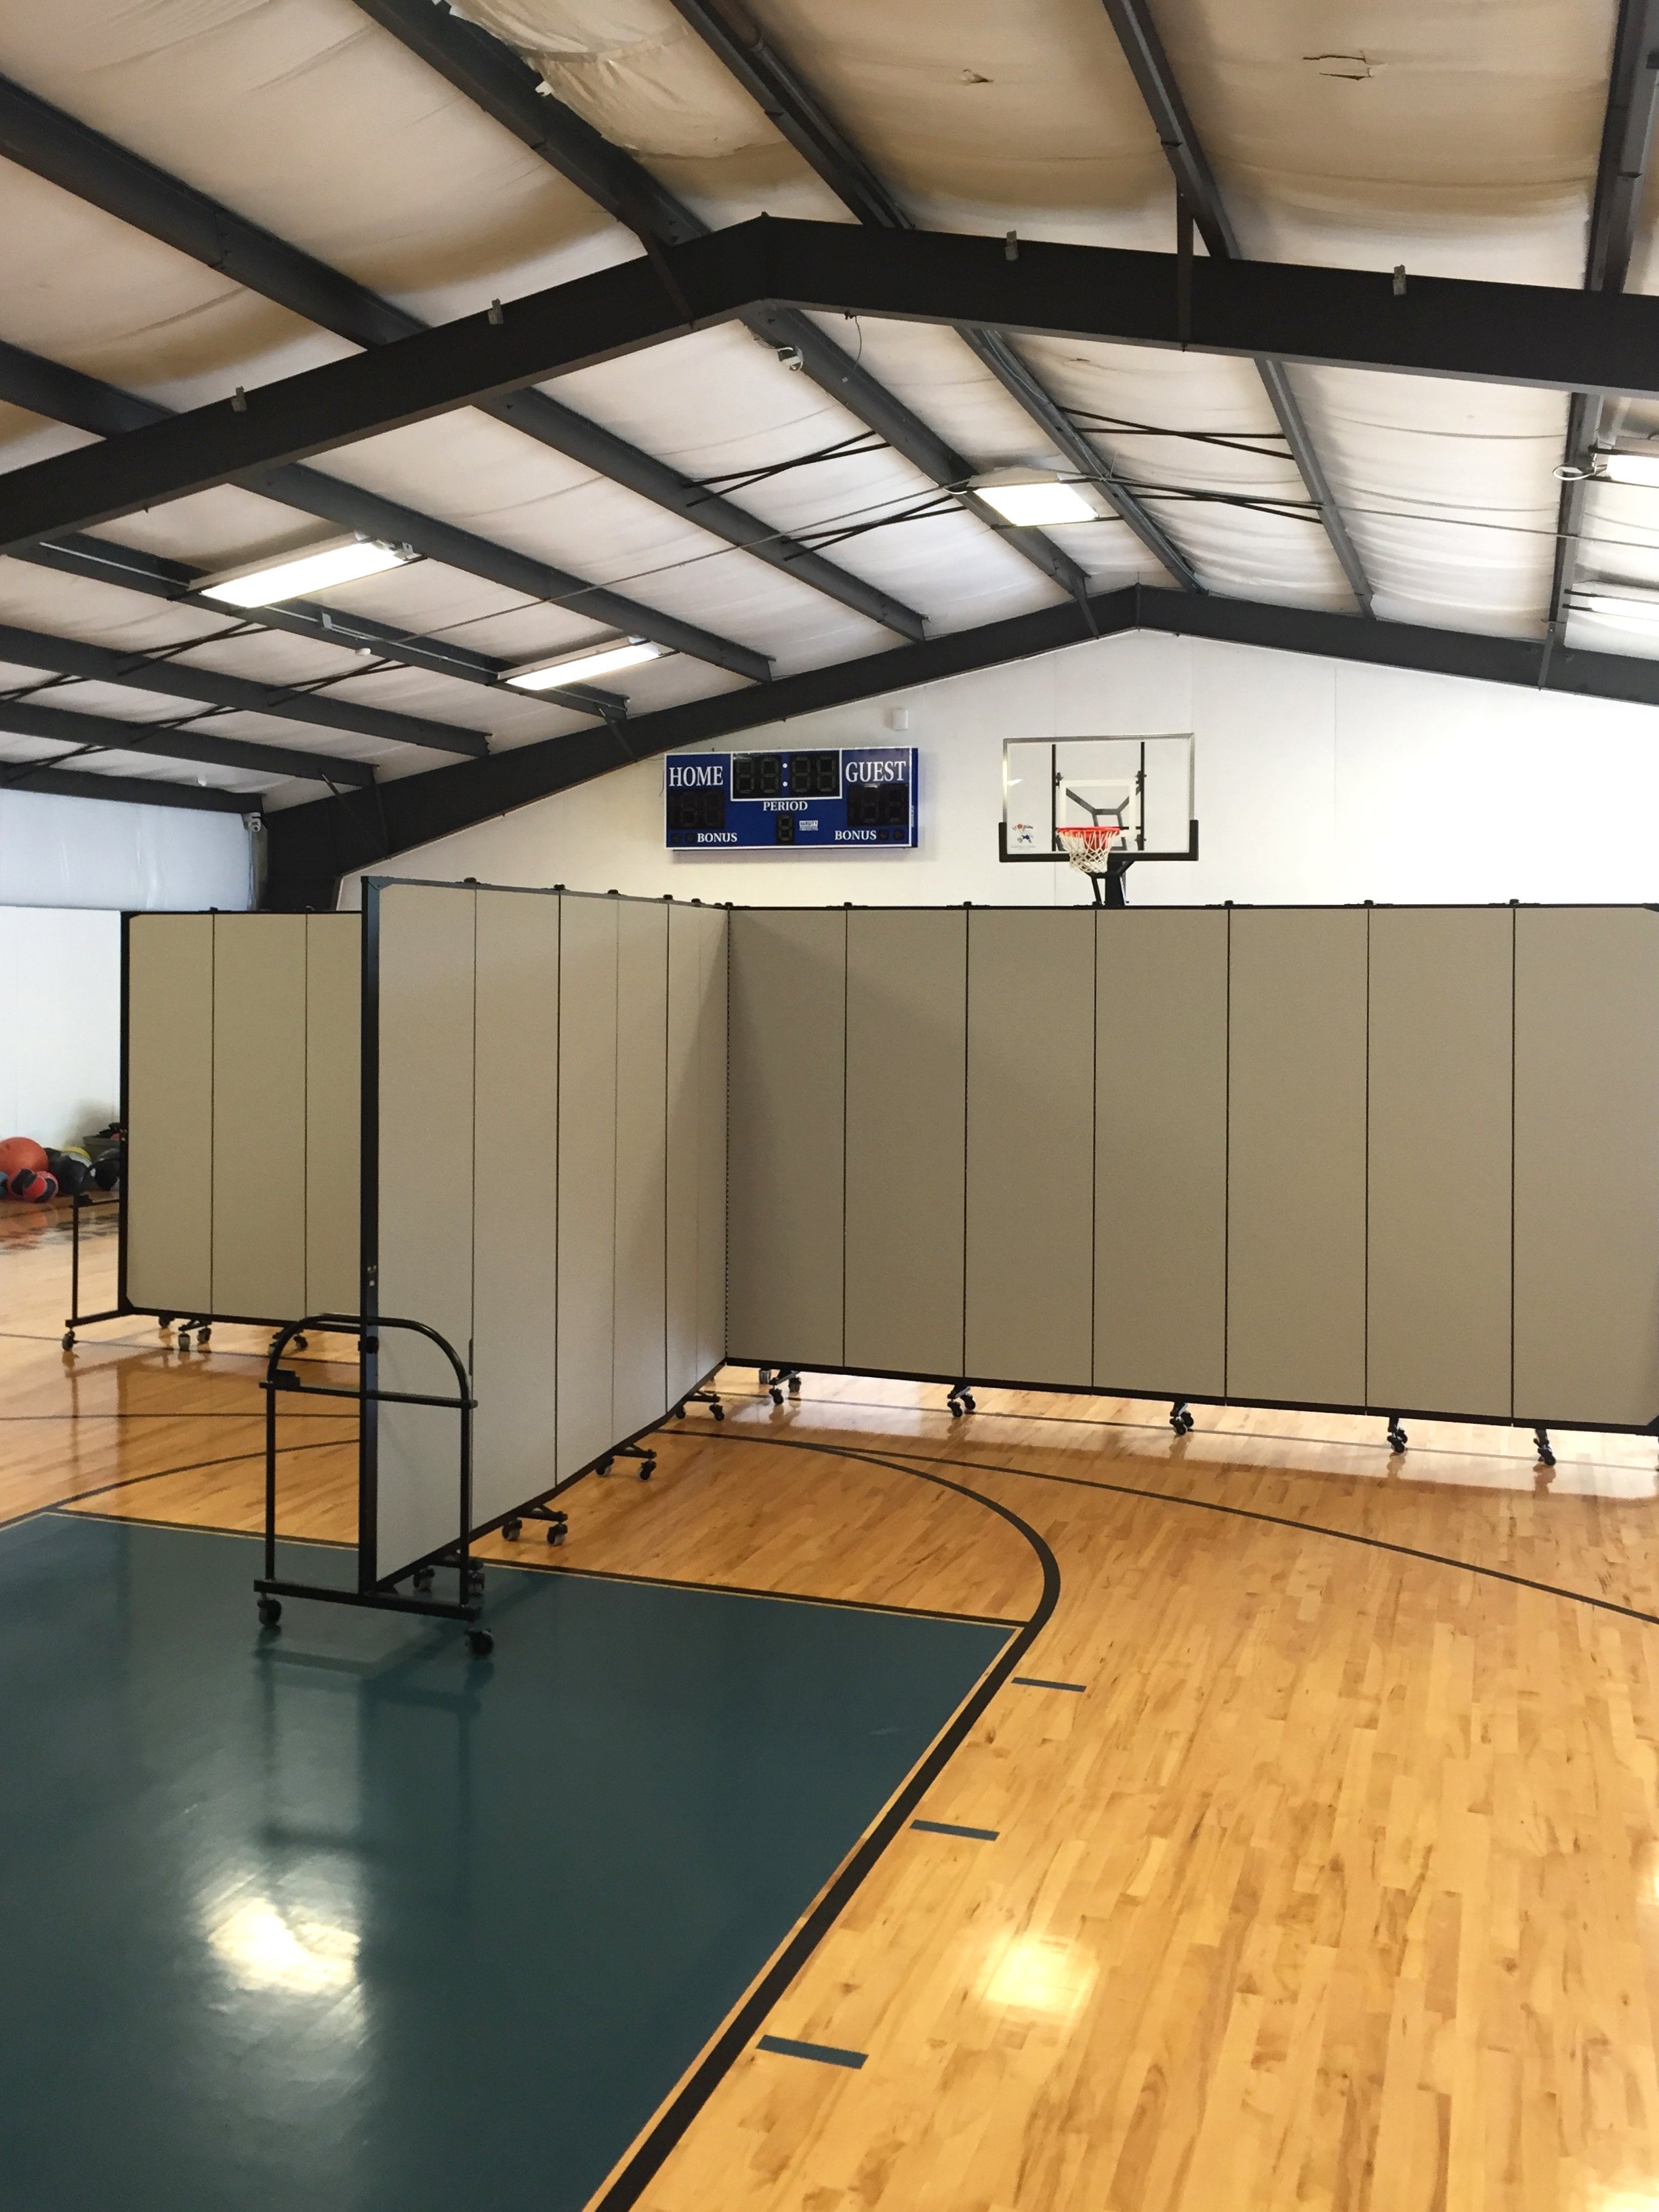 Two room dividers attached to create four classrooms in a gymnasium